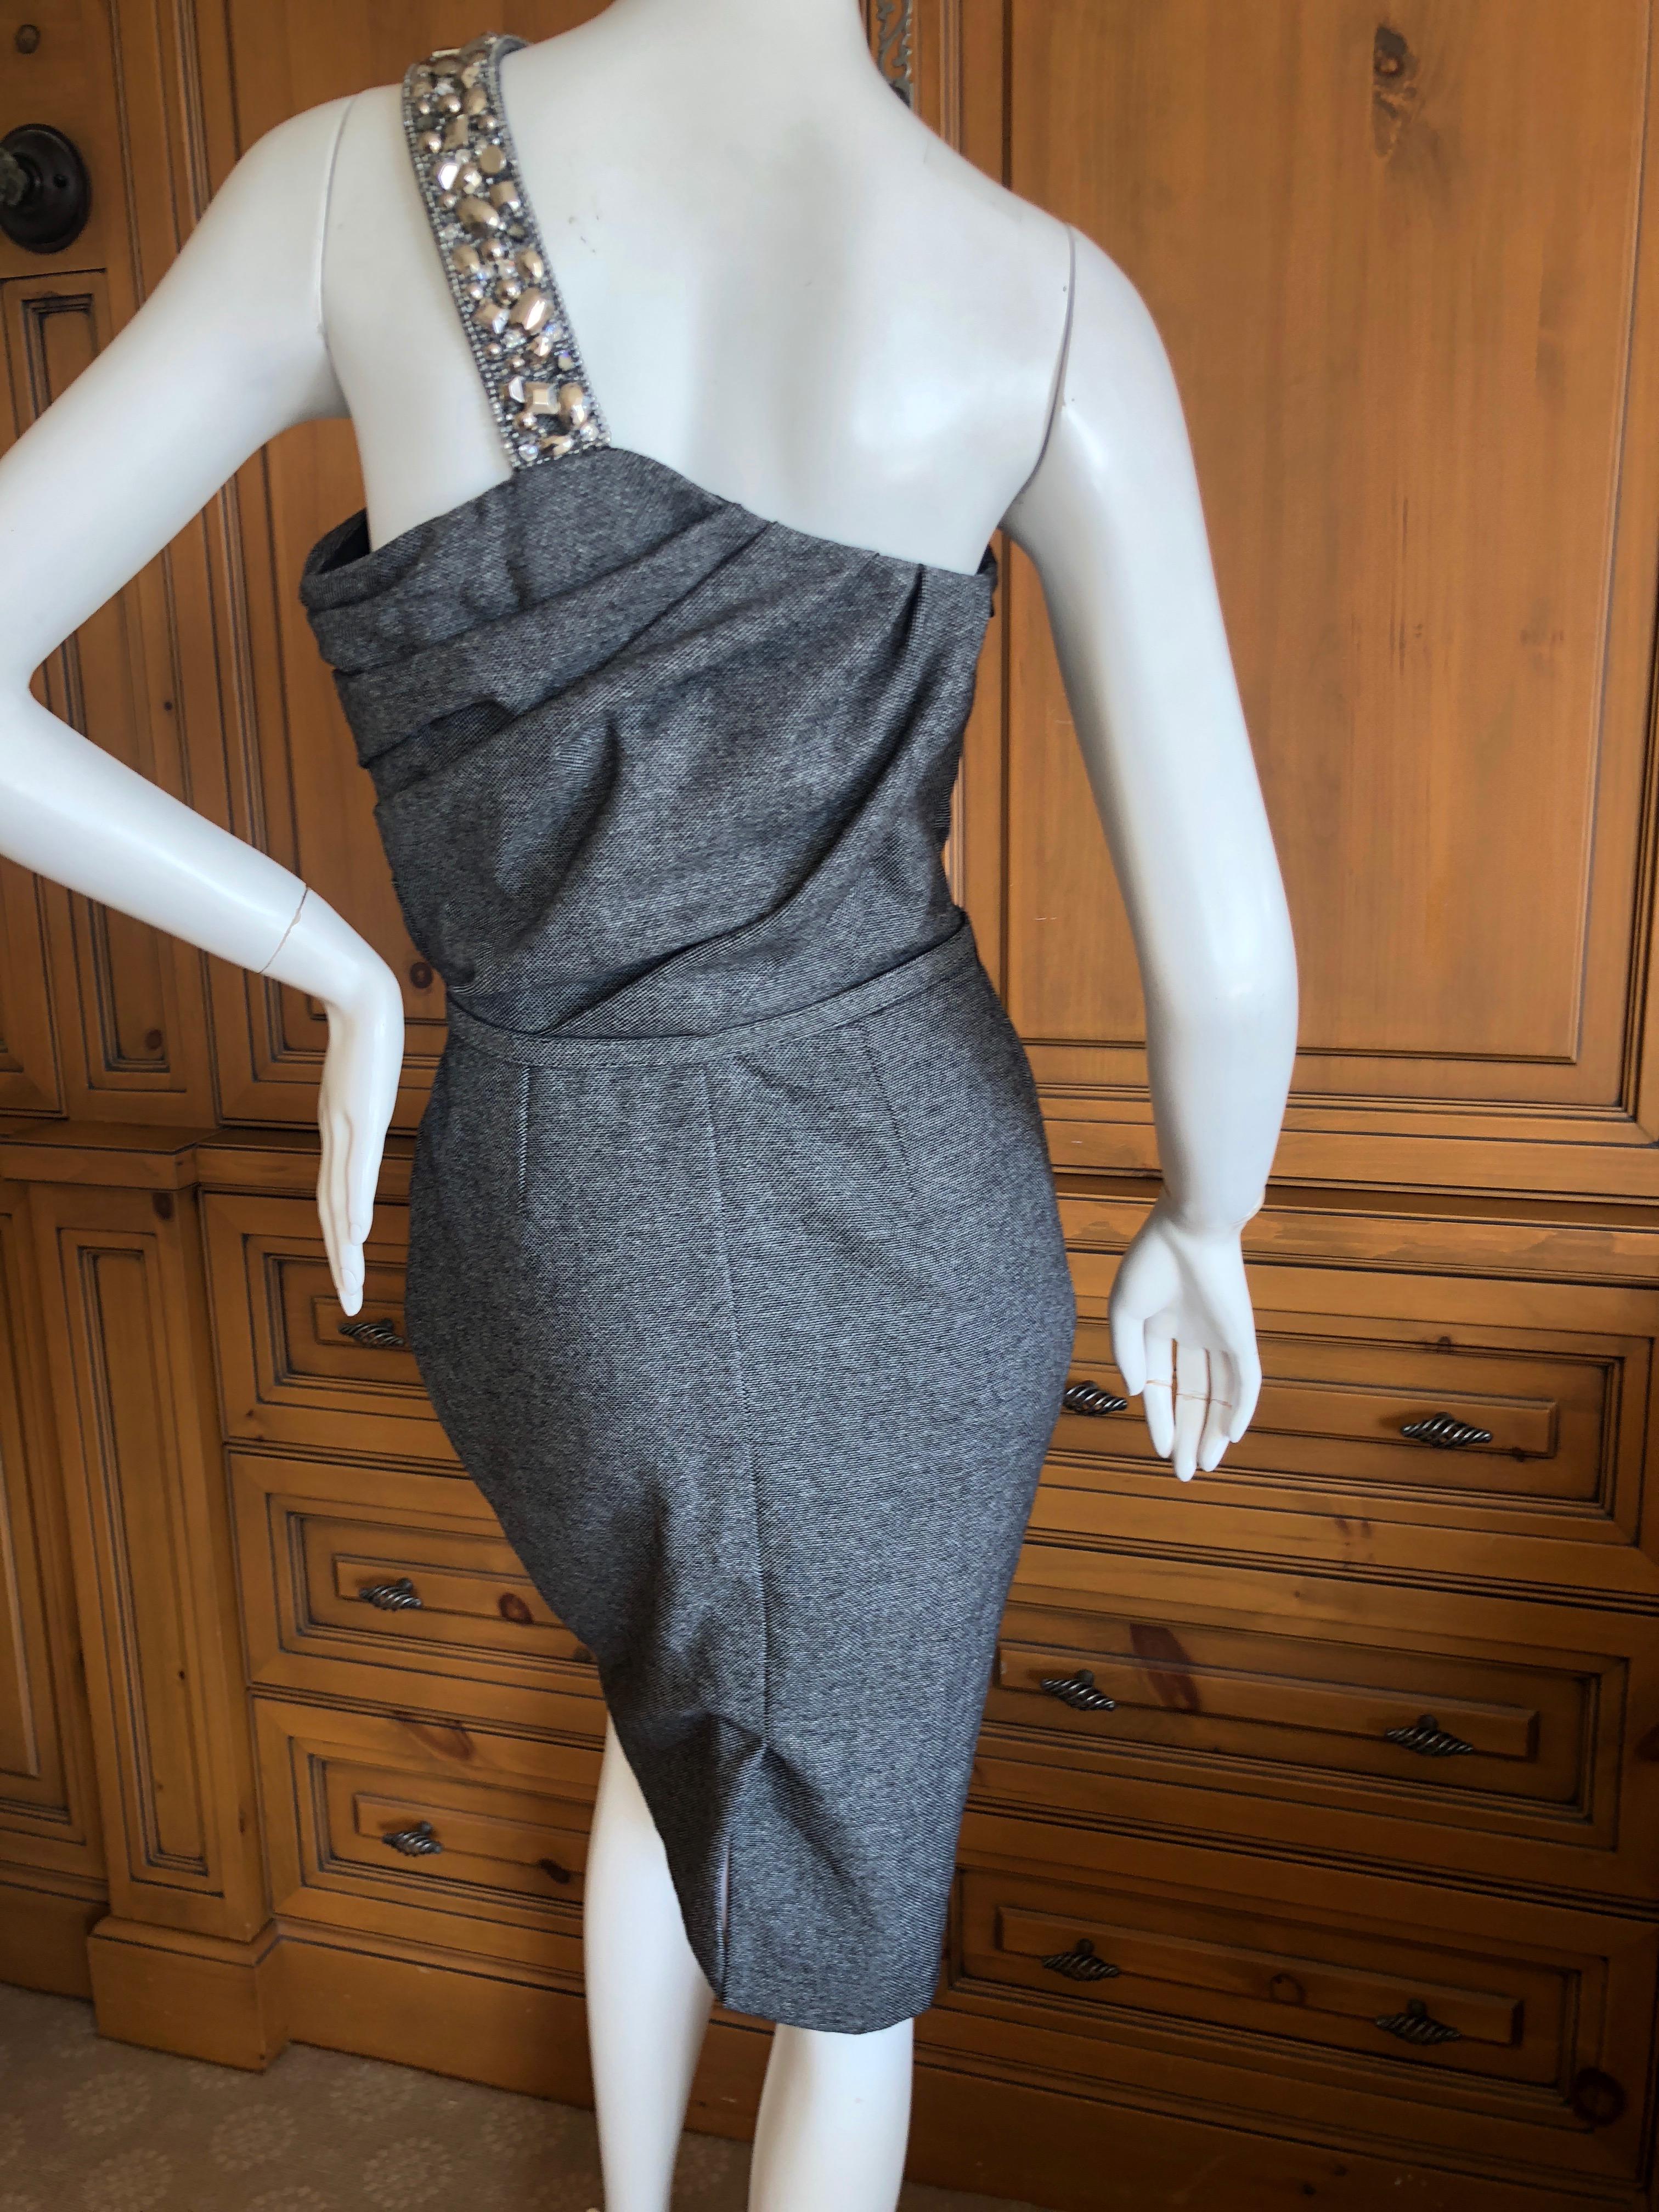 Christian Dior John Galliano Gray Tweed Cocktail Dress with Jewel Shoulder Strap For Sale 1